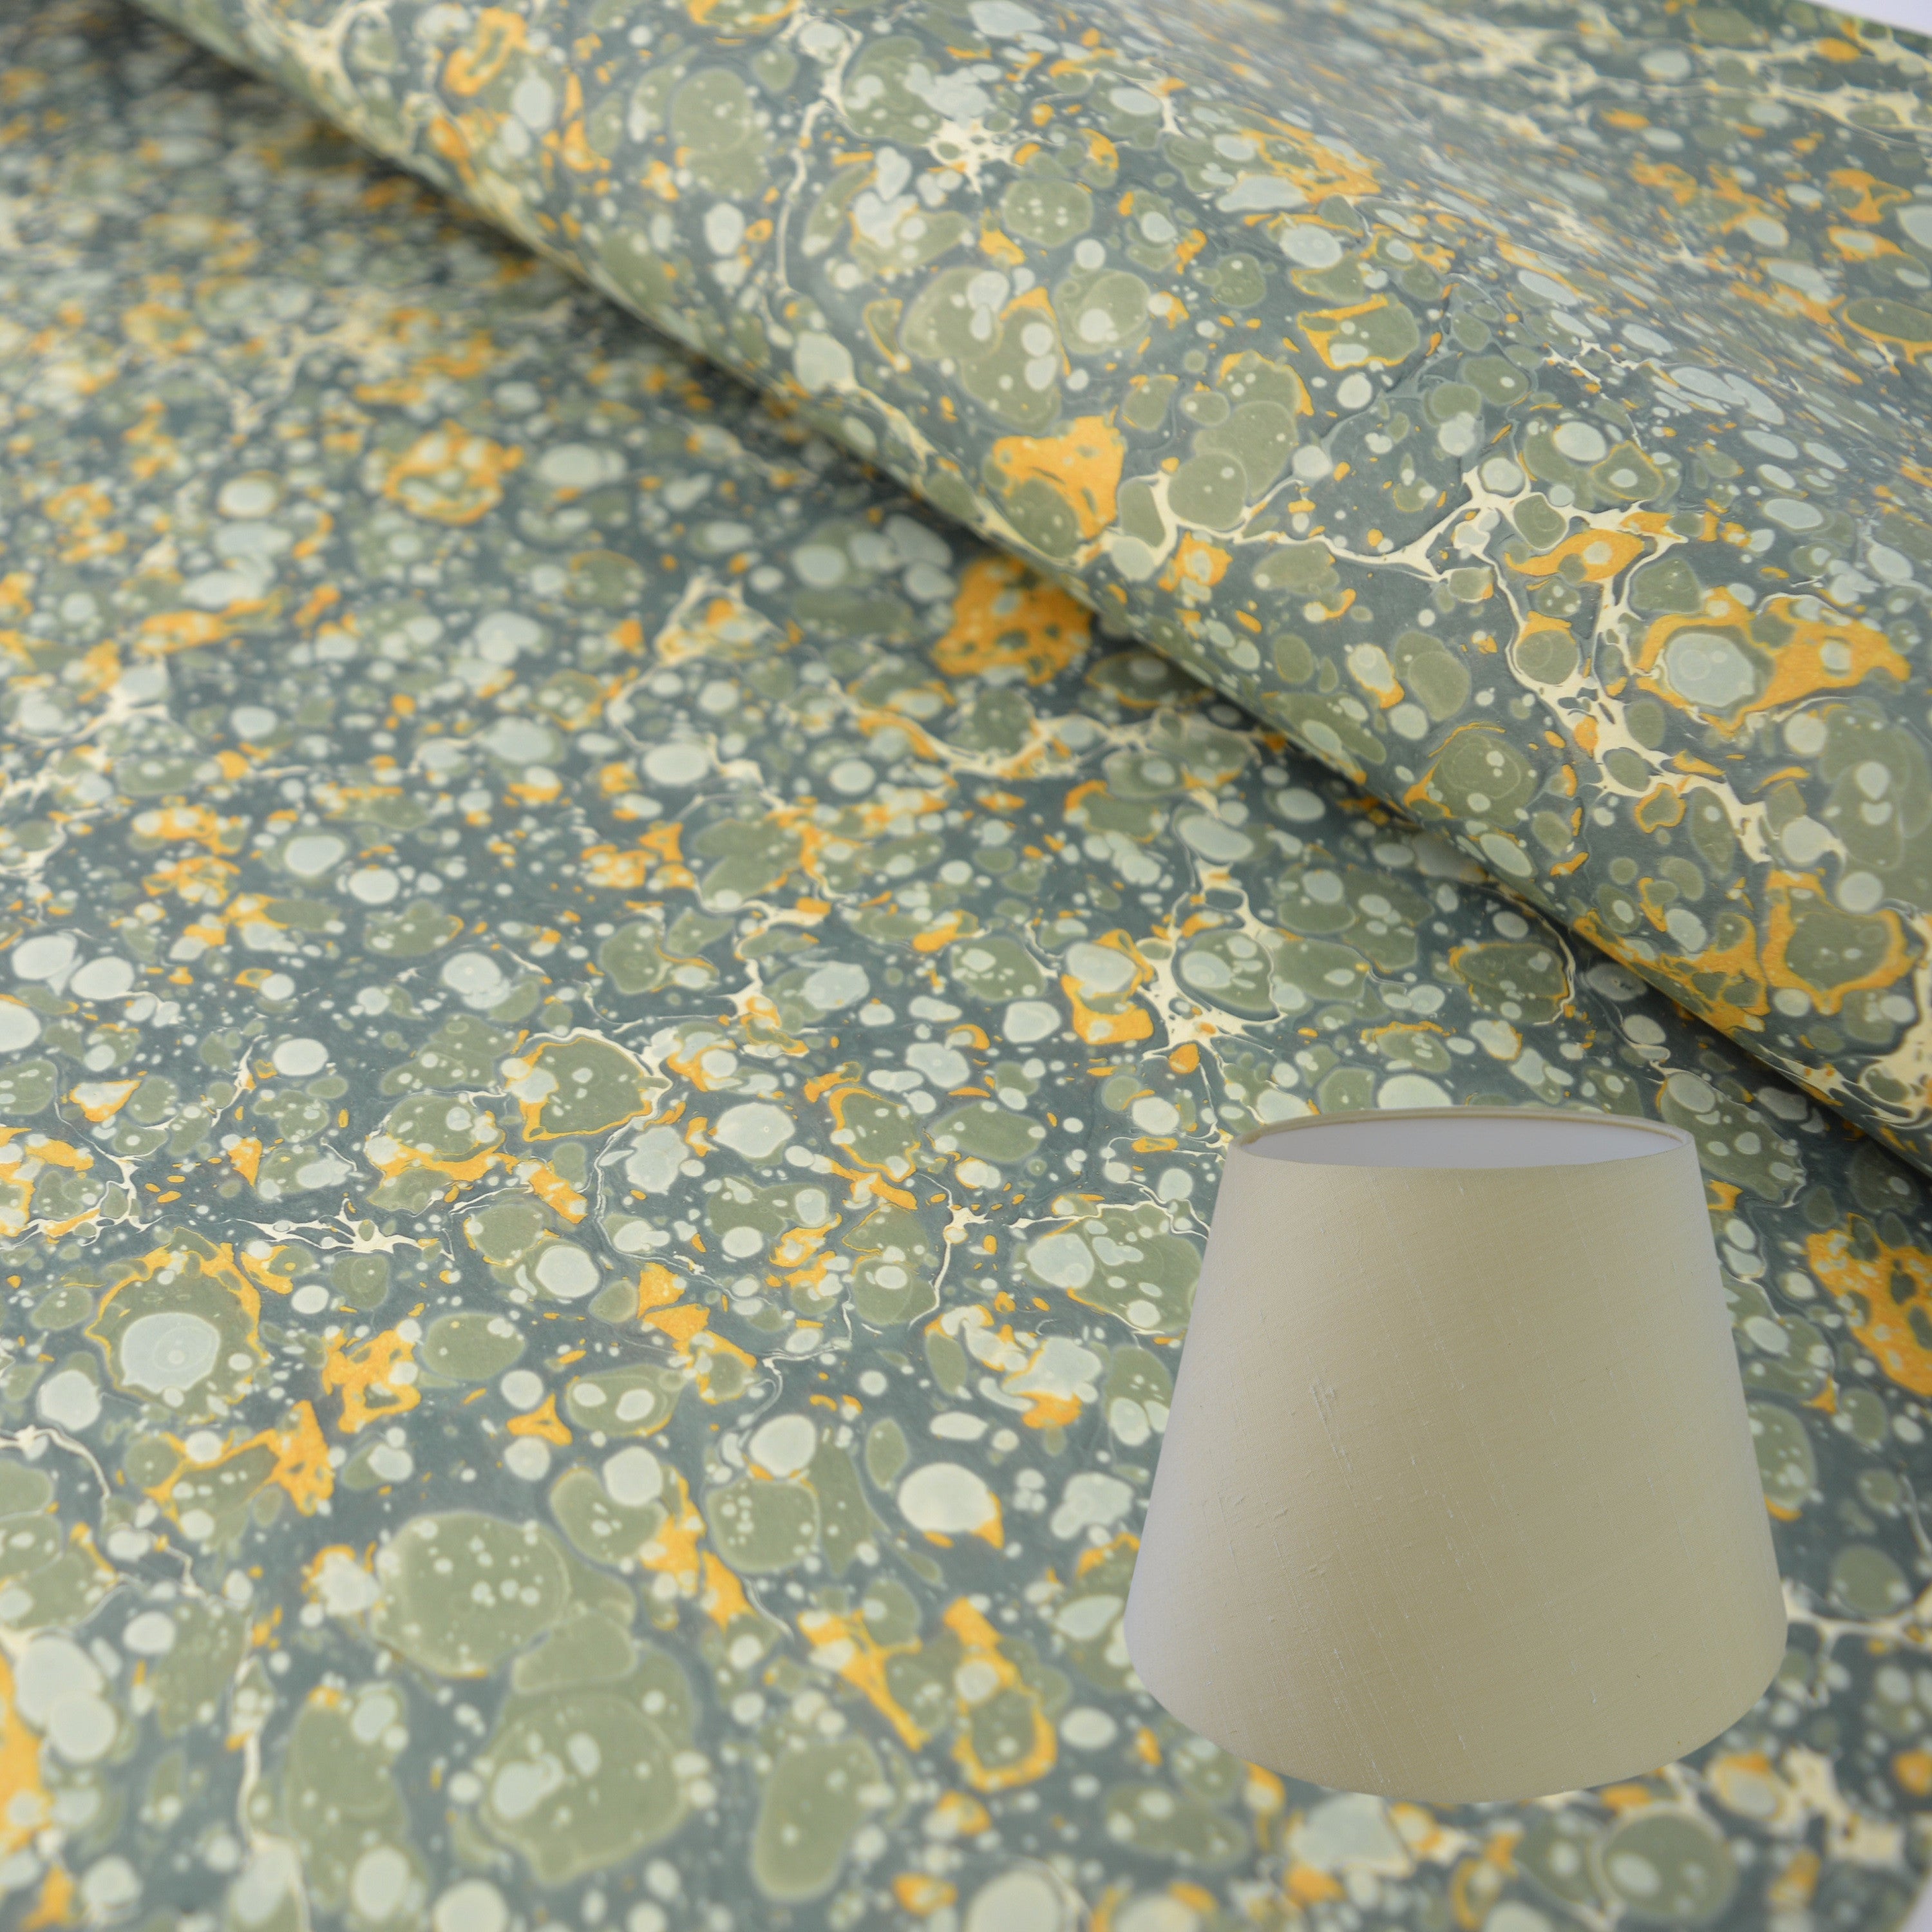 Munro and Kerr green and gold marbled paper empire lampshade